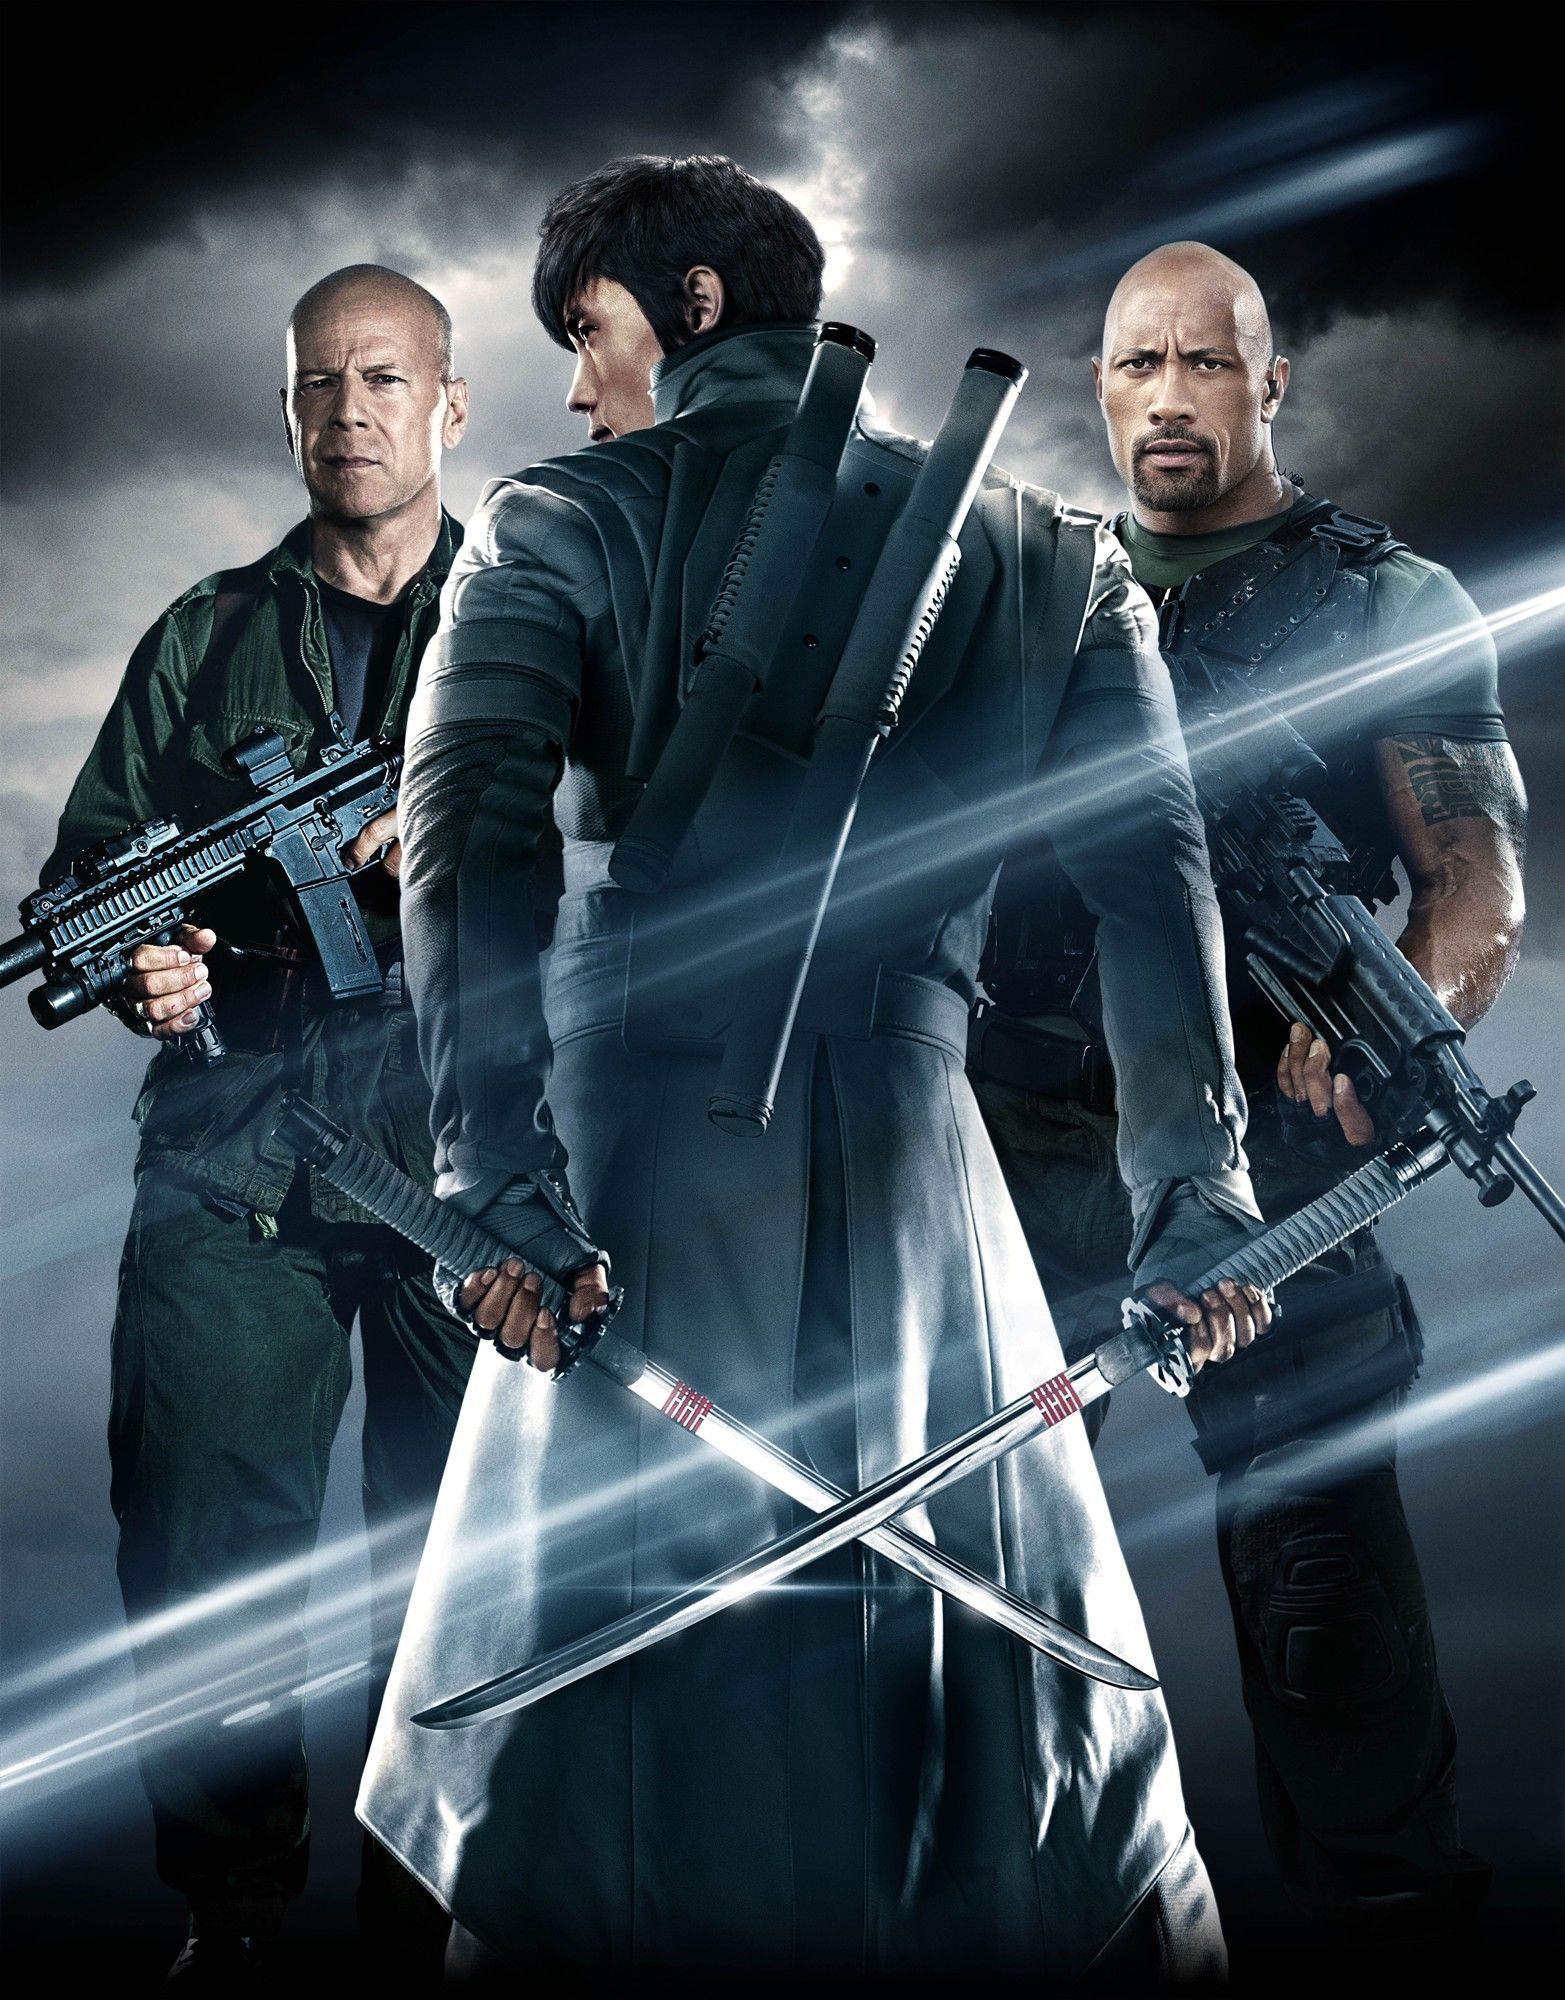 Bruce Willis, Lee Byung-hun and The Rock in Paramount Pictures' G.I. Joe: Retaliation (2013)